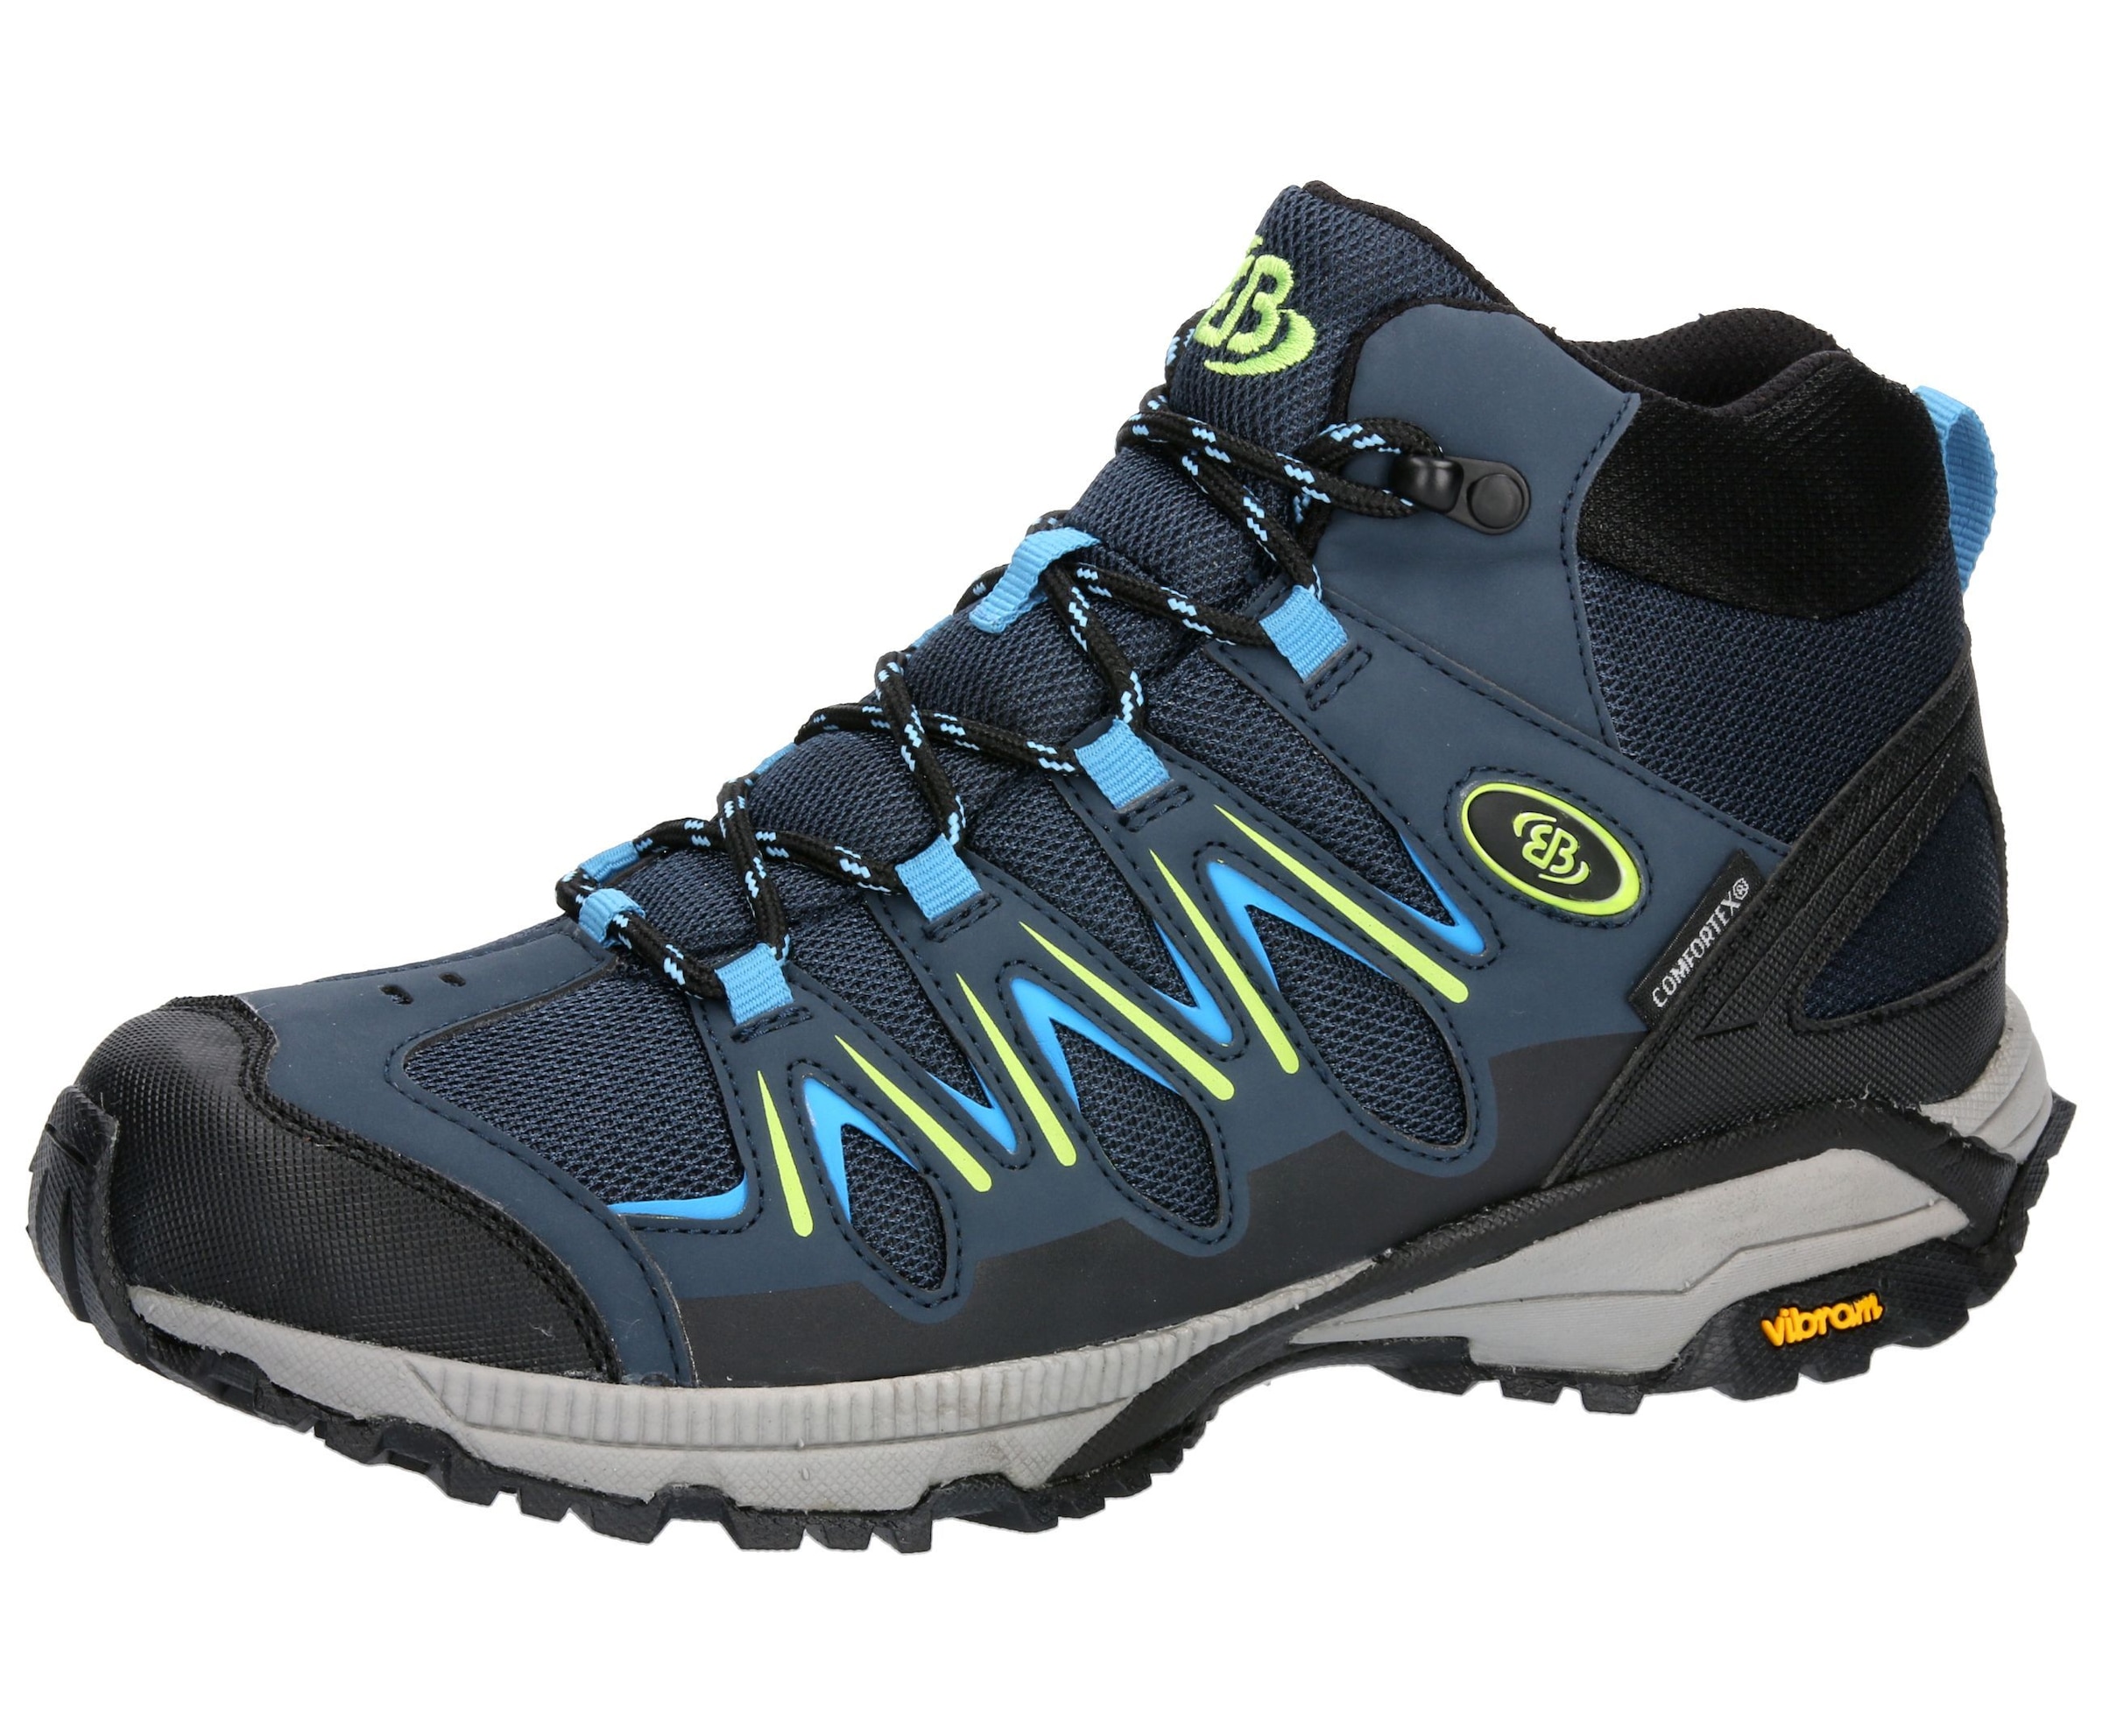 Outdoorschuh »Outdoorstiefel Expedition Mid«